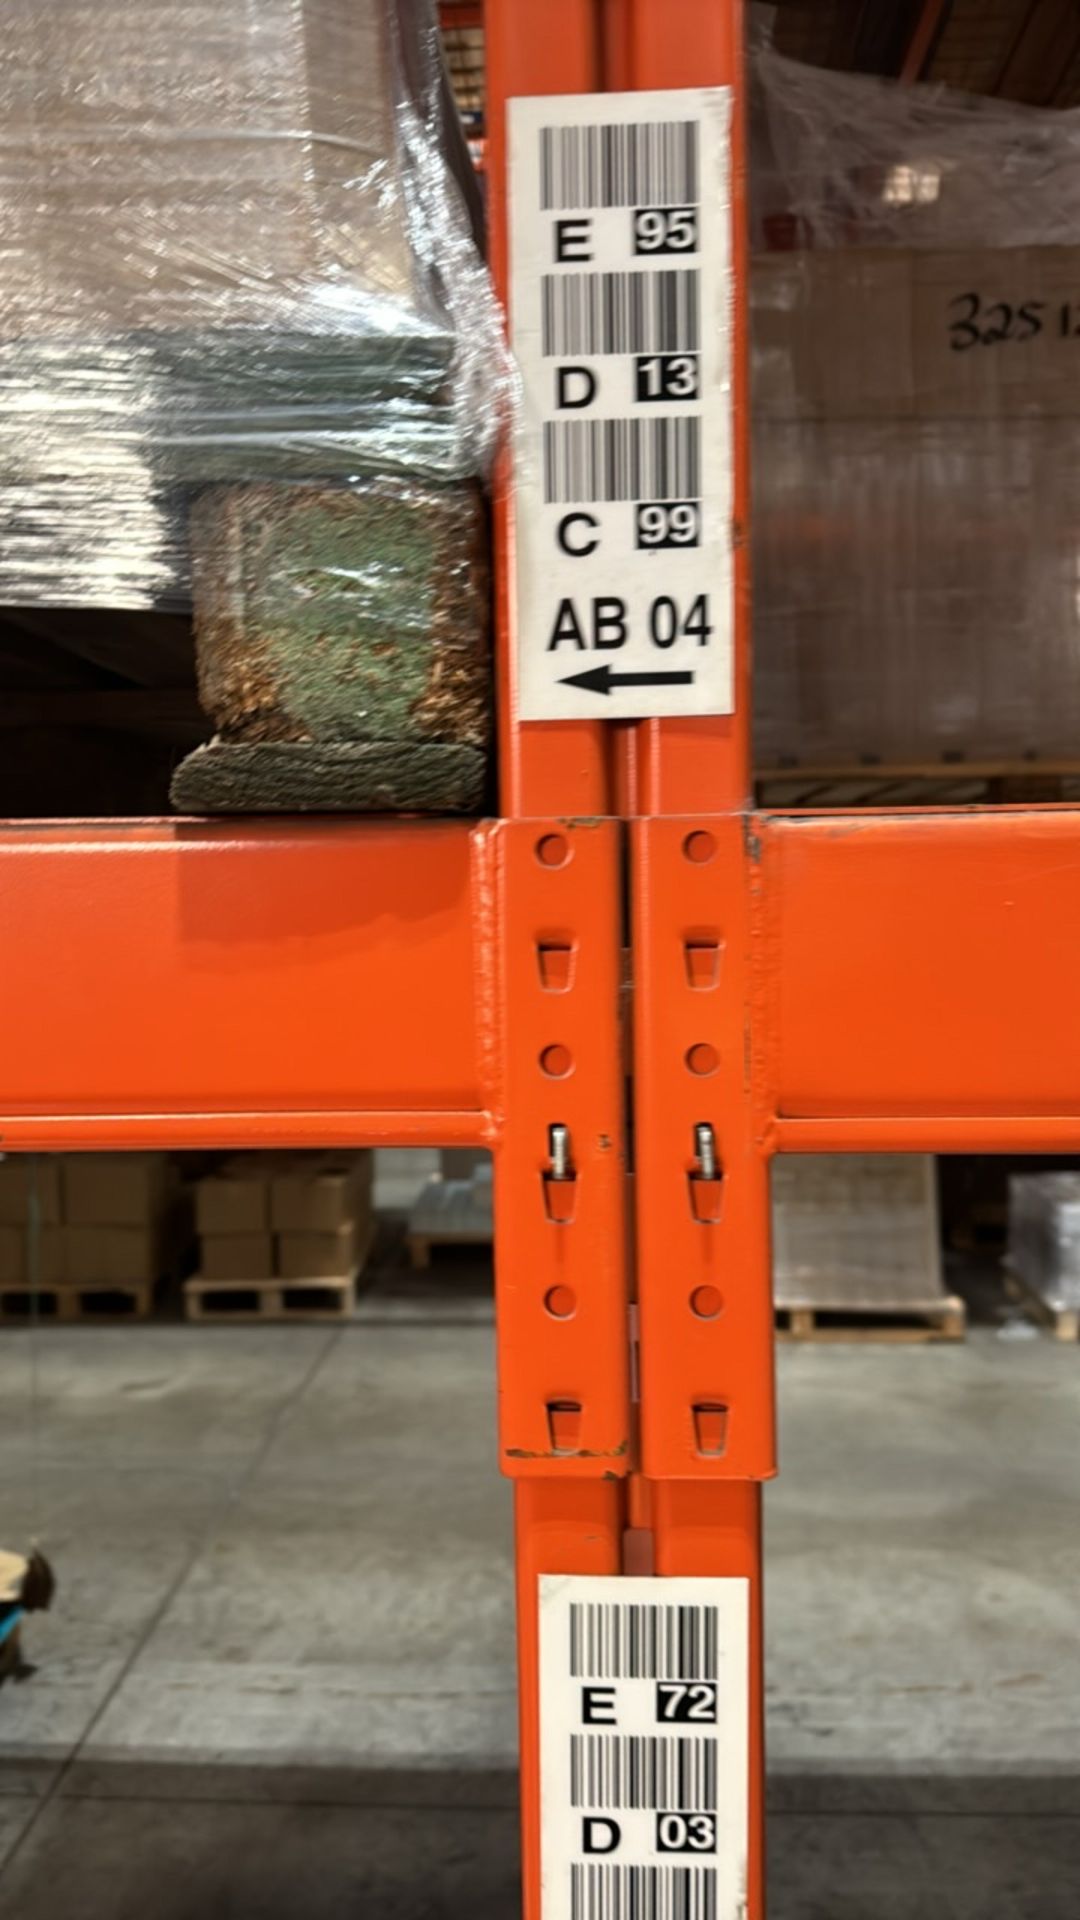 24 Bays Of Boltless Pallet Racking - Image 6 of 8